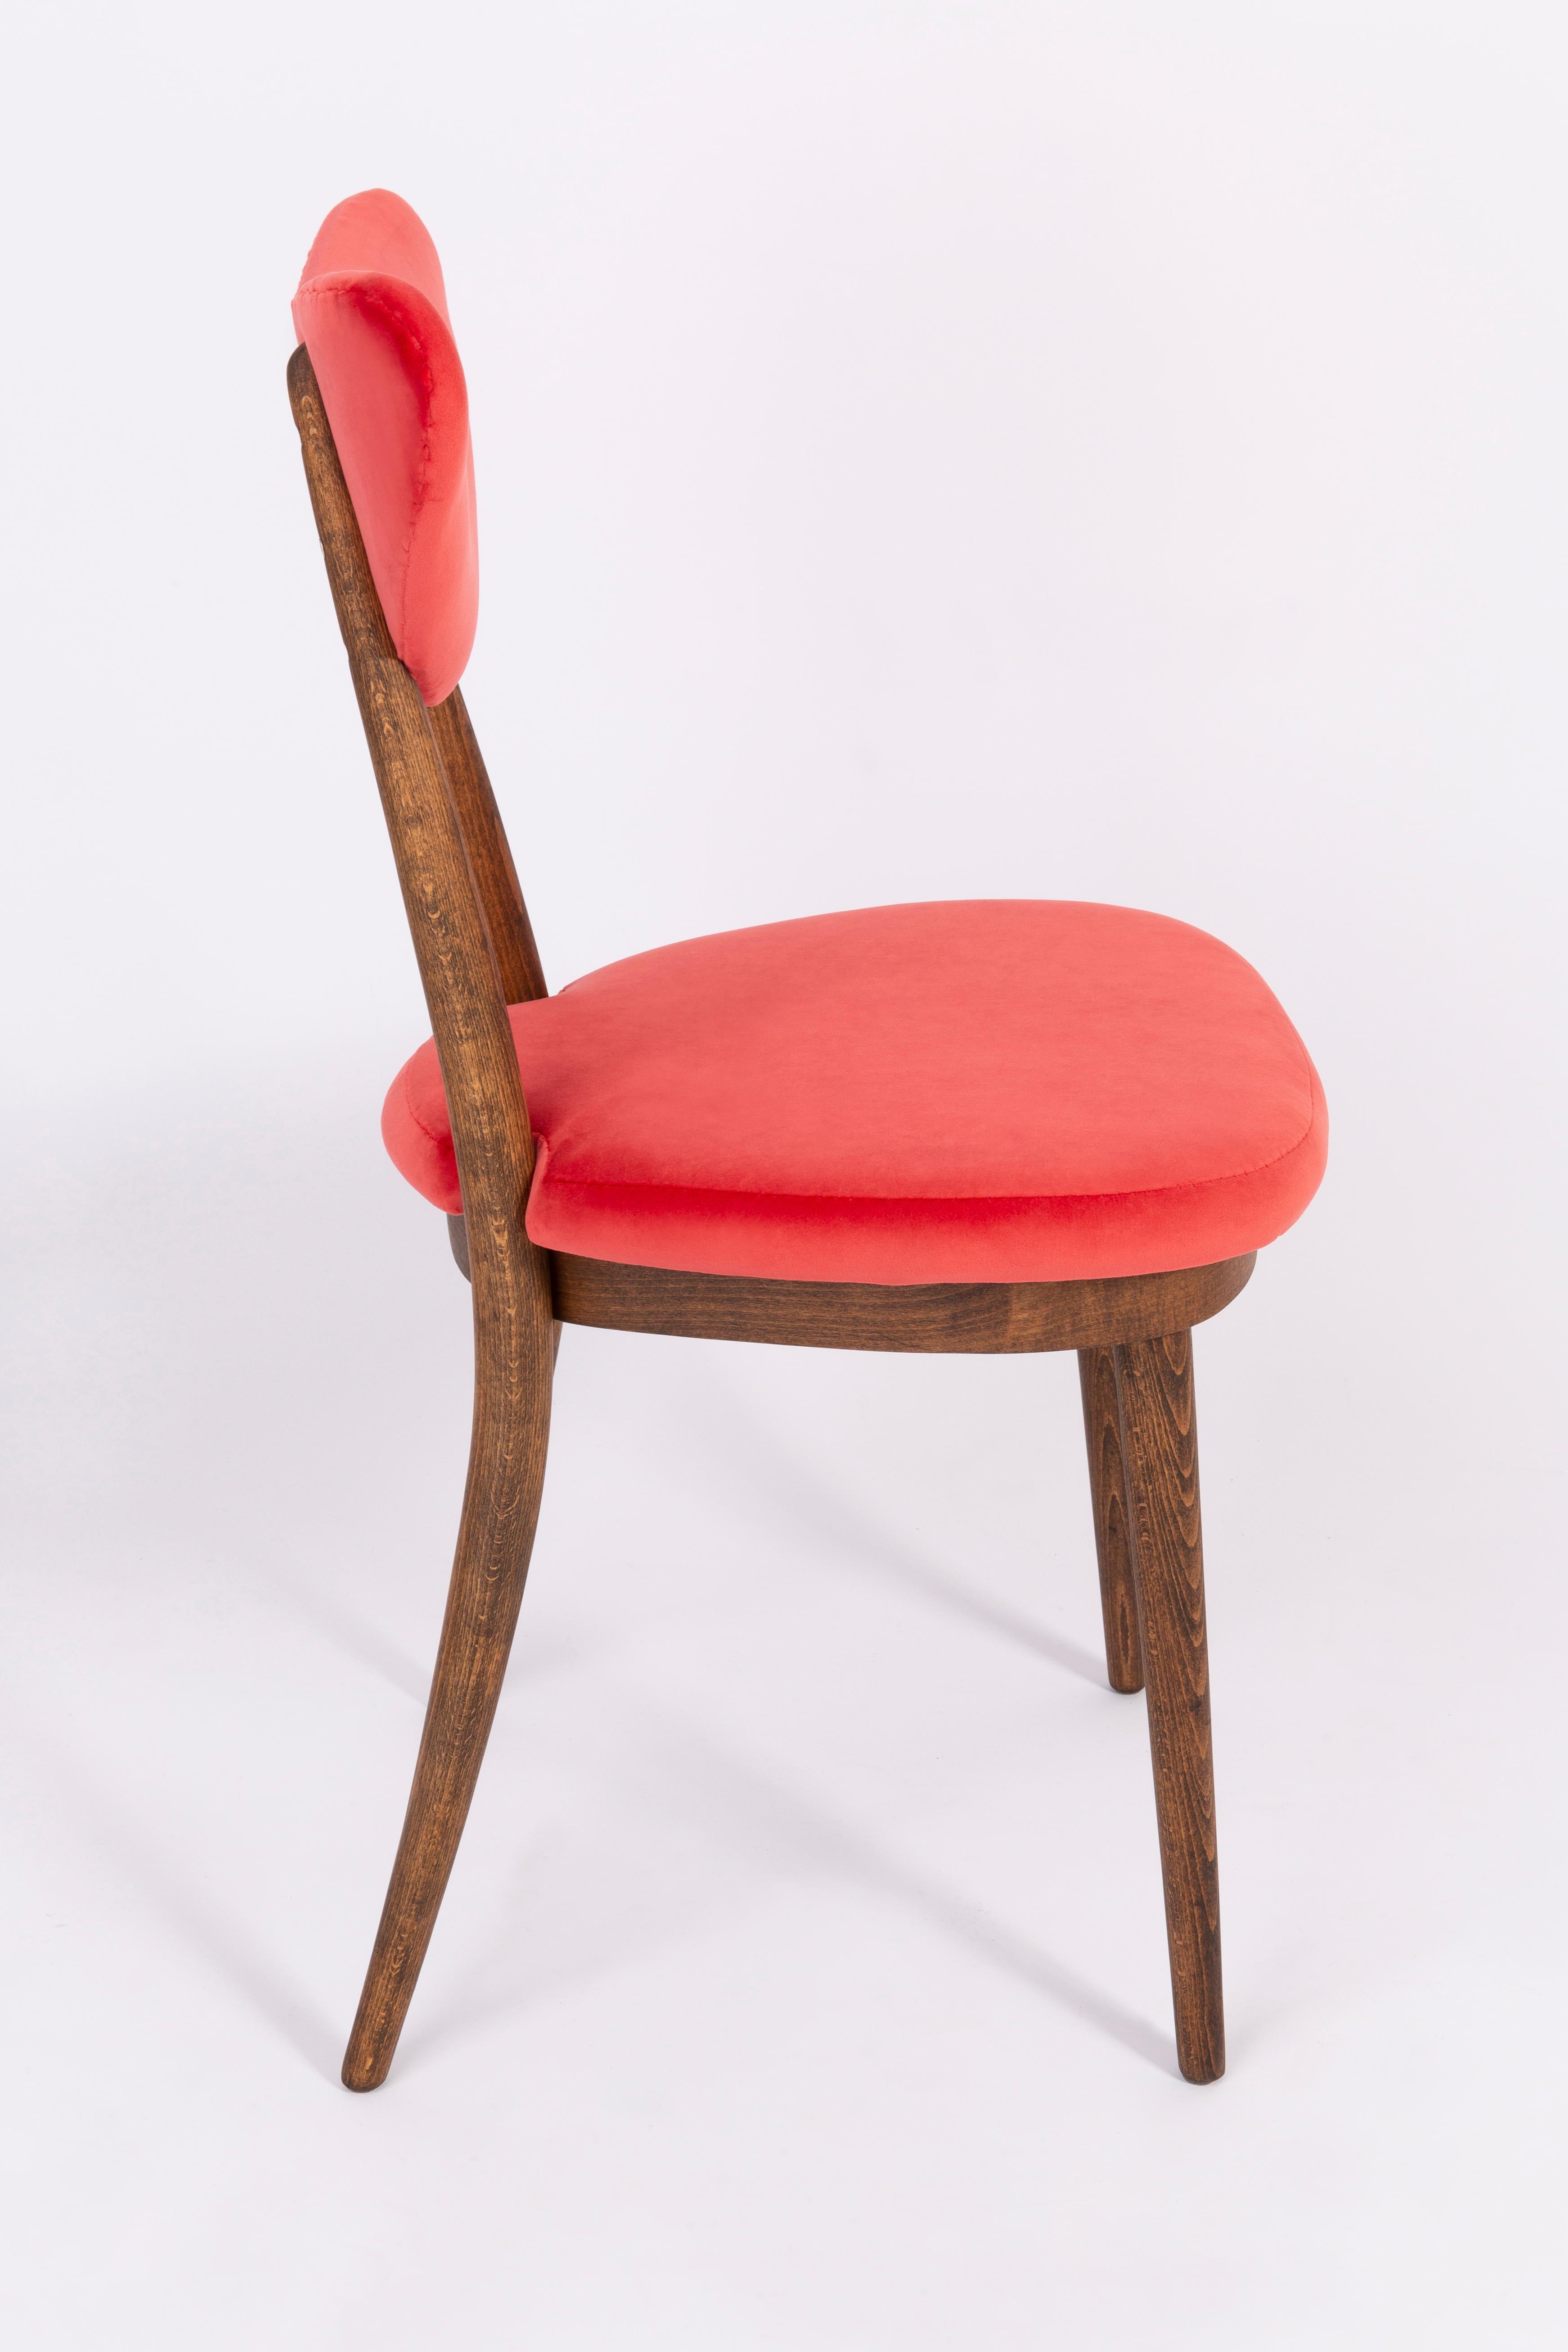 Set of Four Red Heart Chairs, Poland, 1960s For Sale 5